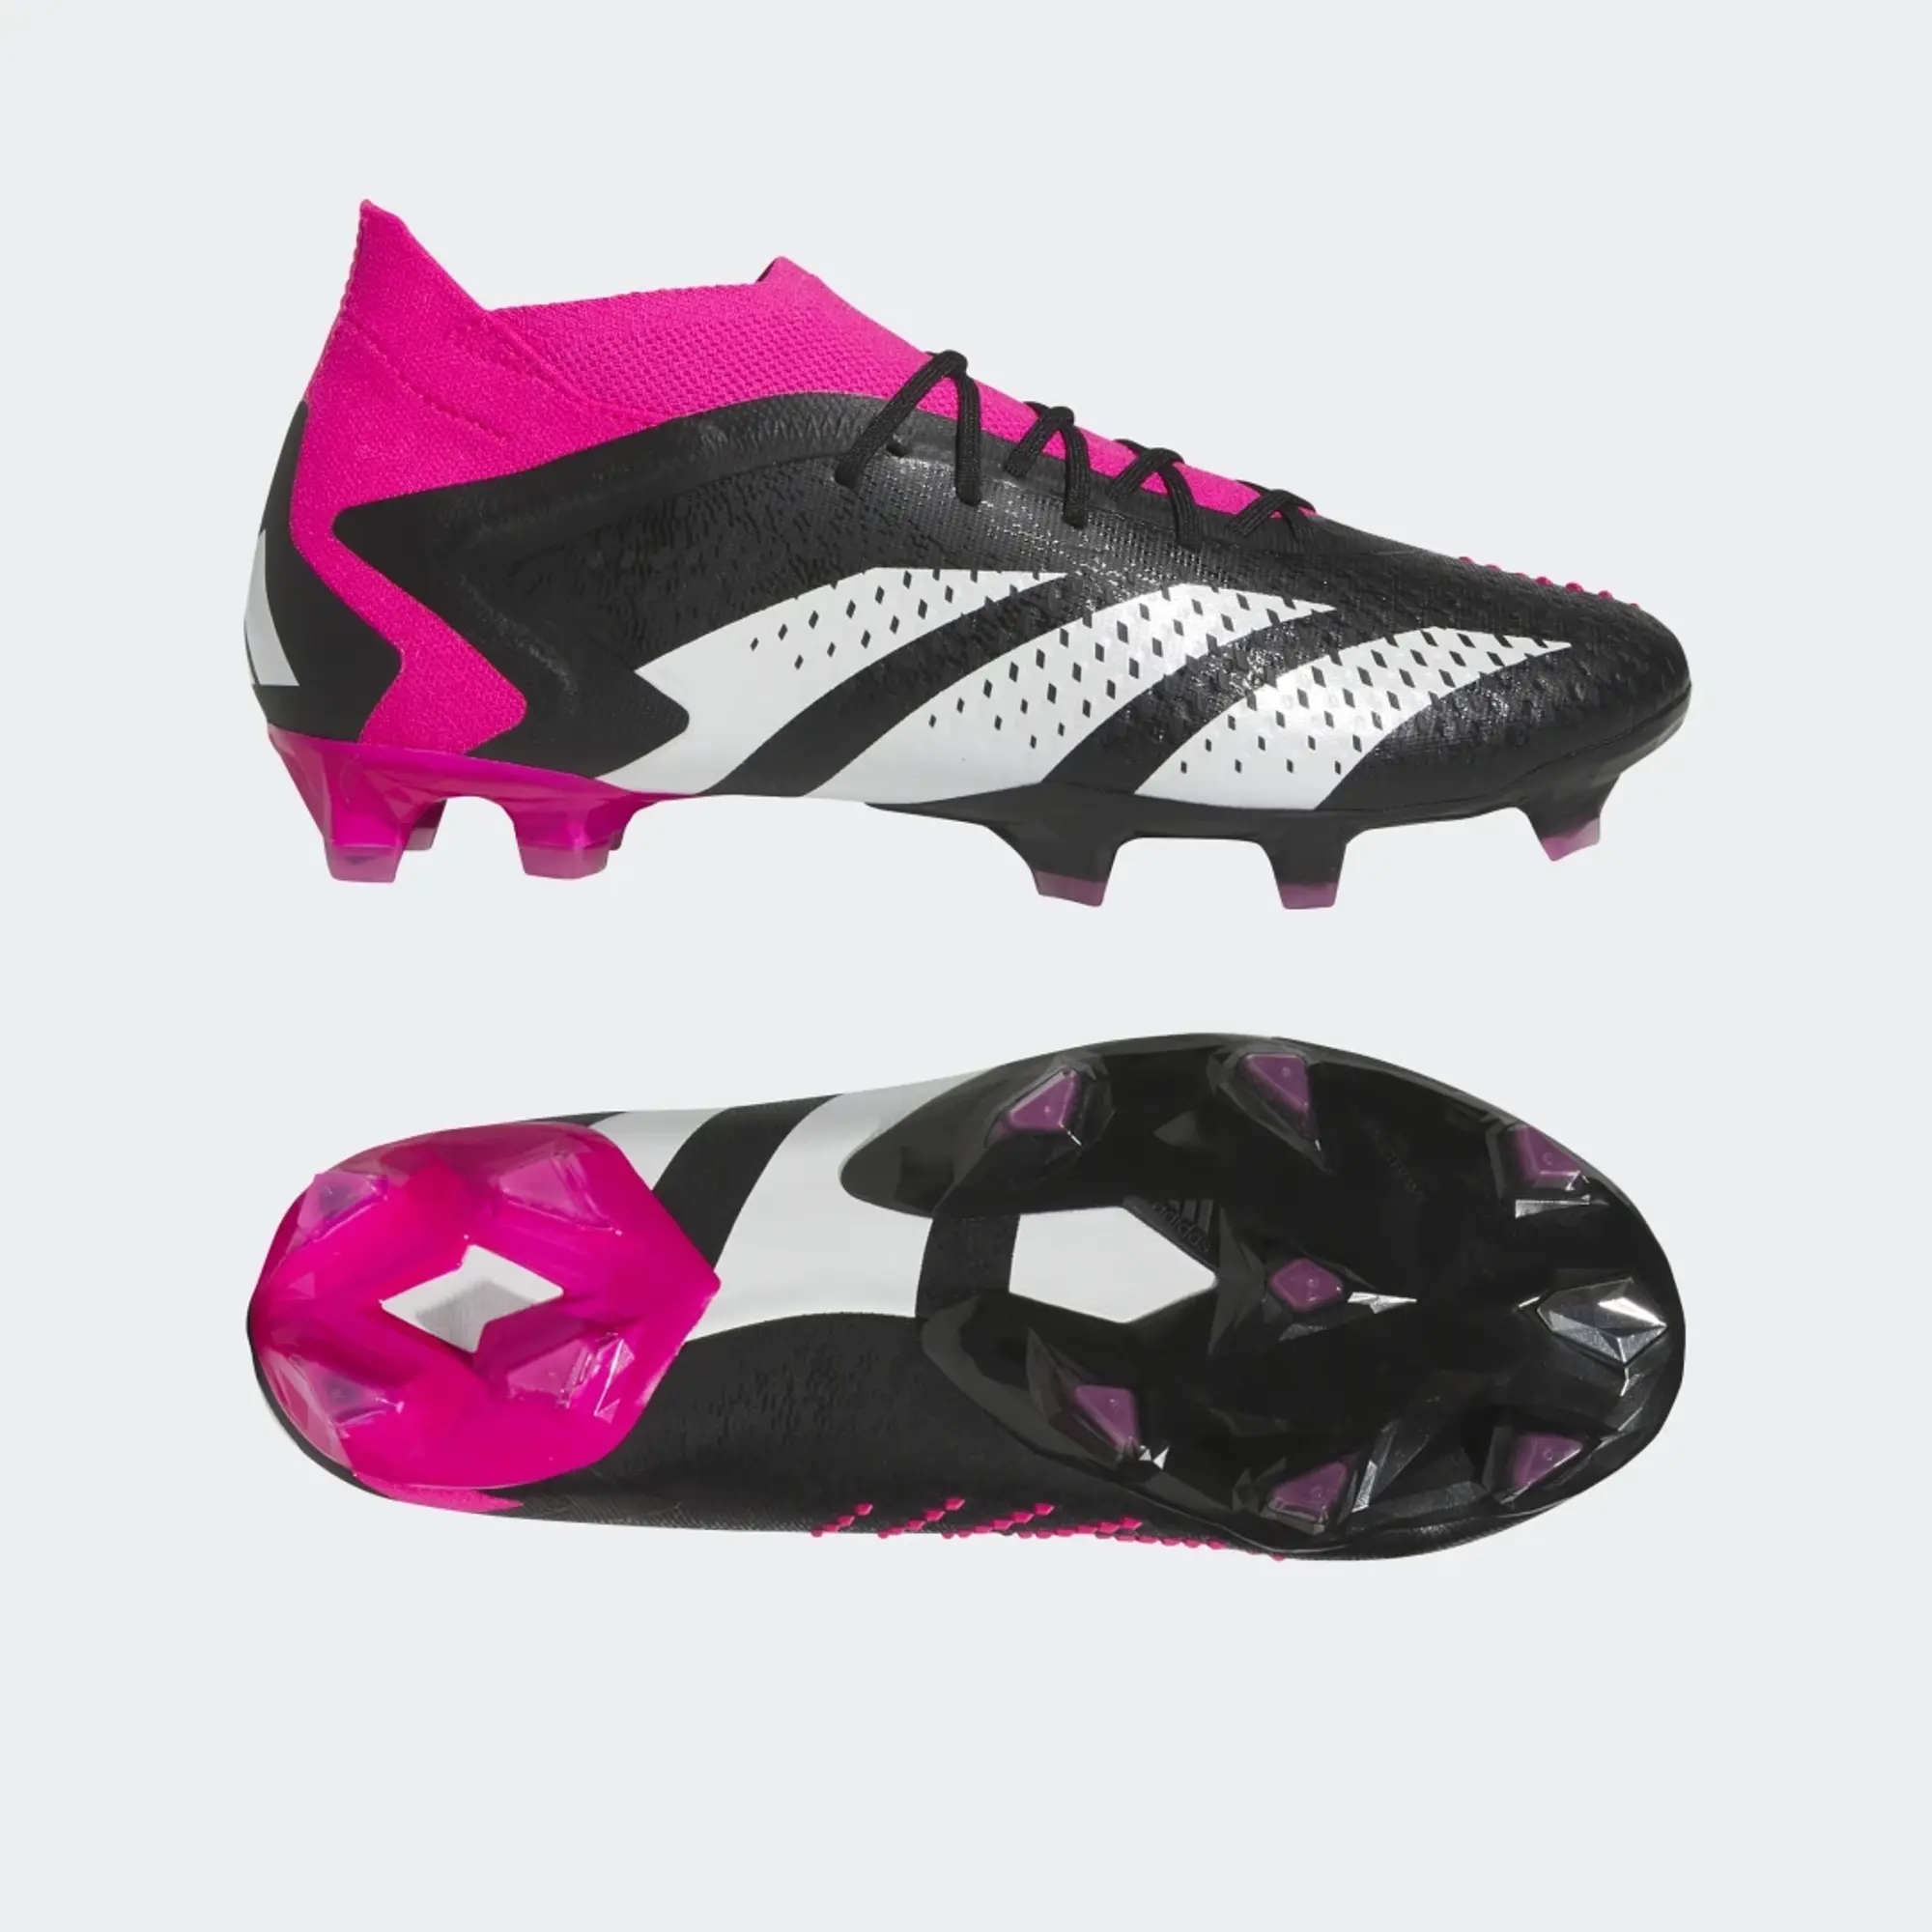 adidas Predator Accuracy.1 Firm Ground Boots - Core Black / Cloud White / Team Shock Pink 2